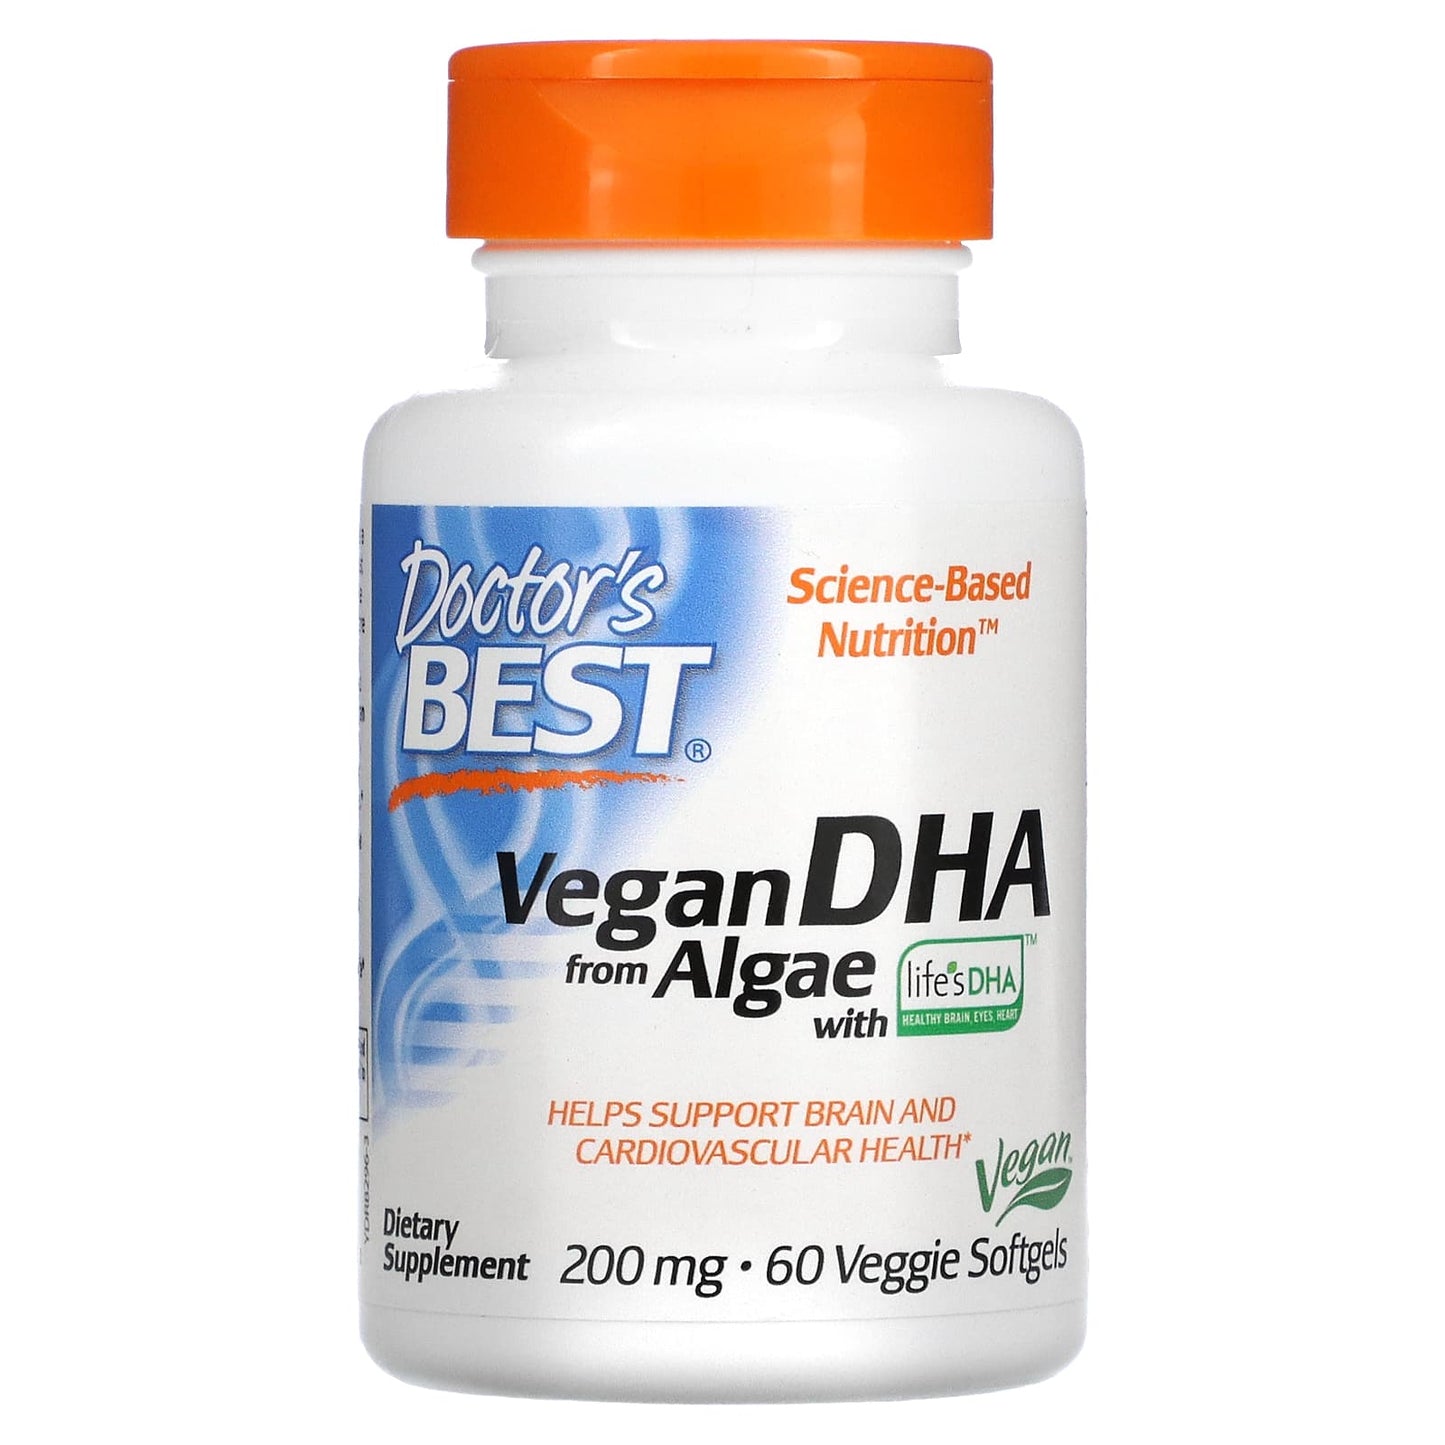 Doctor's Best-Vegan DHA from Algae with Life's DHA-200 mg-60 Veggie Softgels